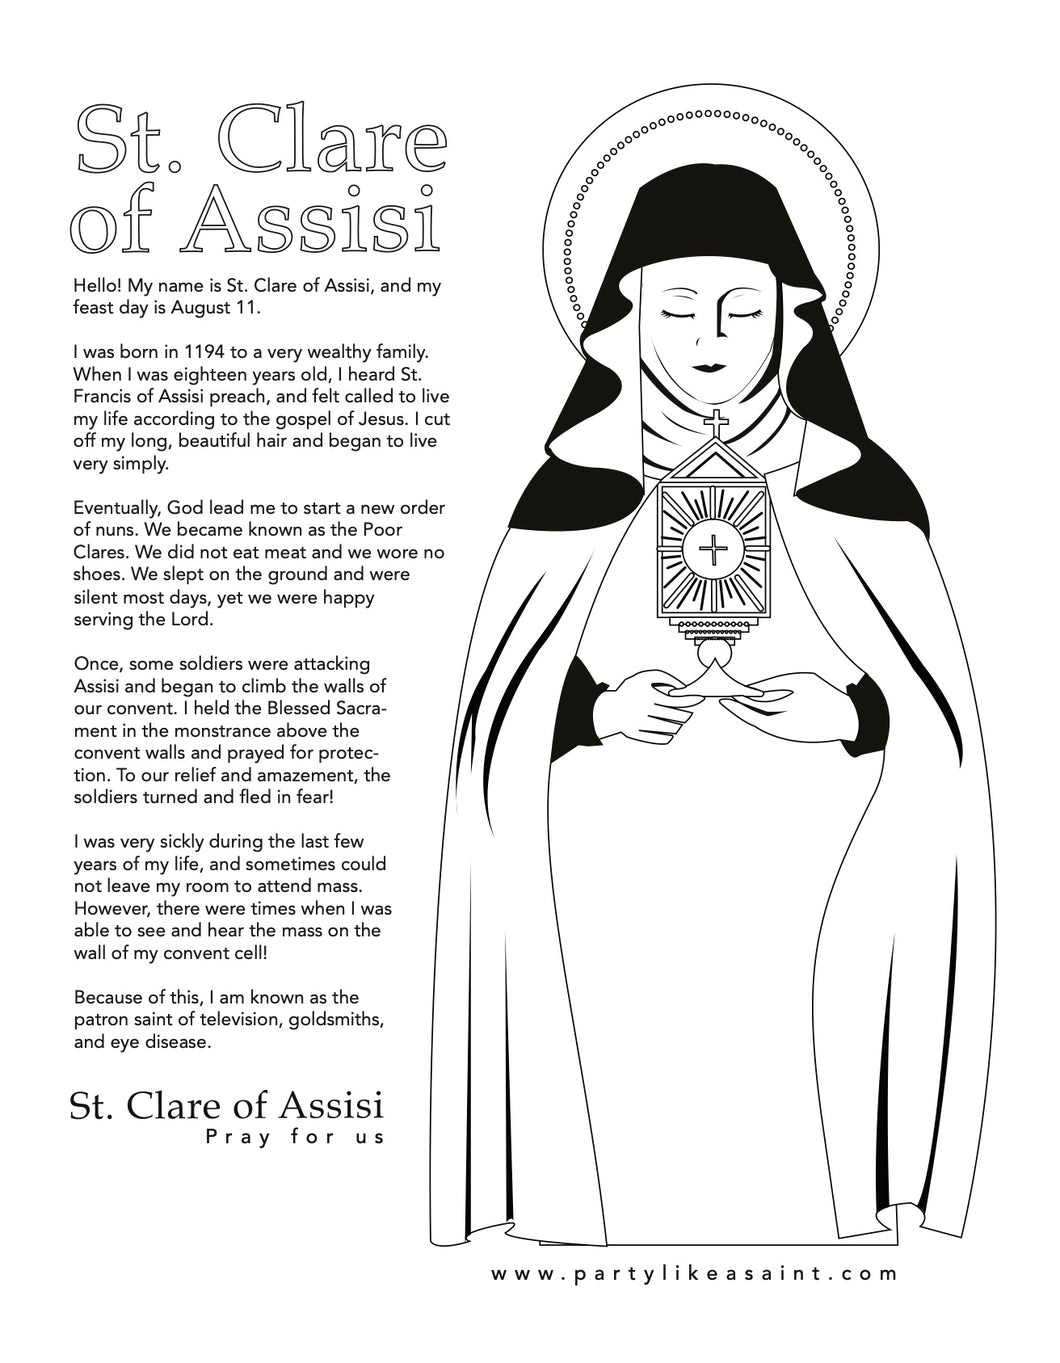 St. Clare of Assisi coloring page and story